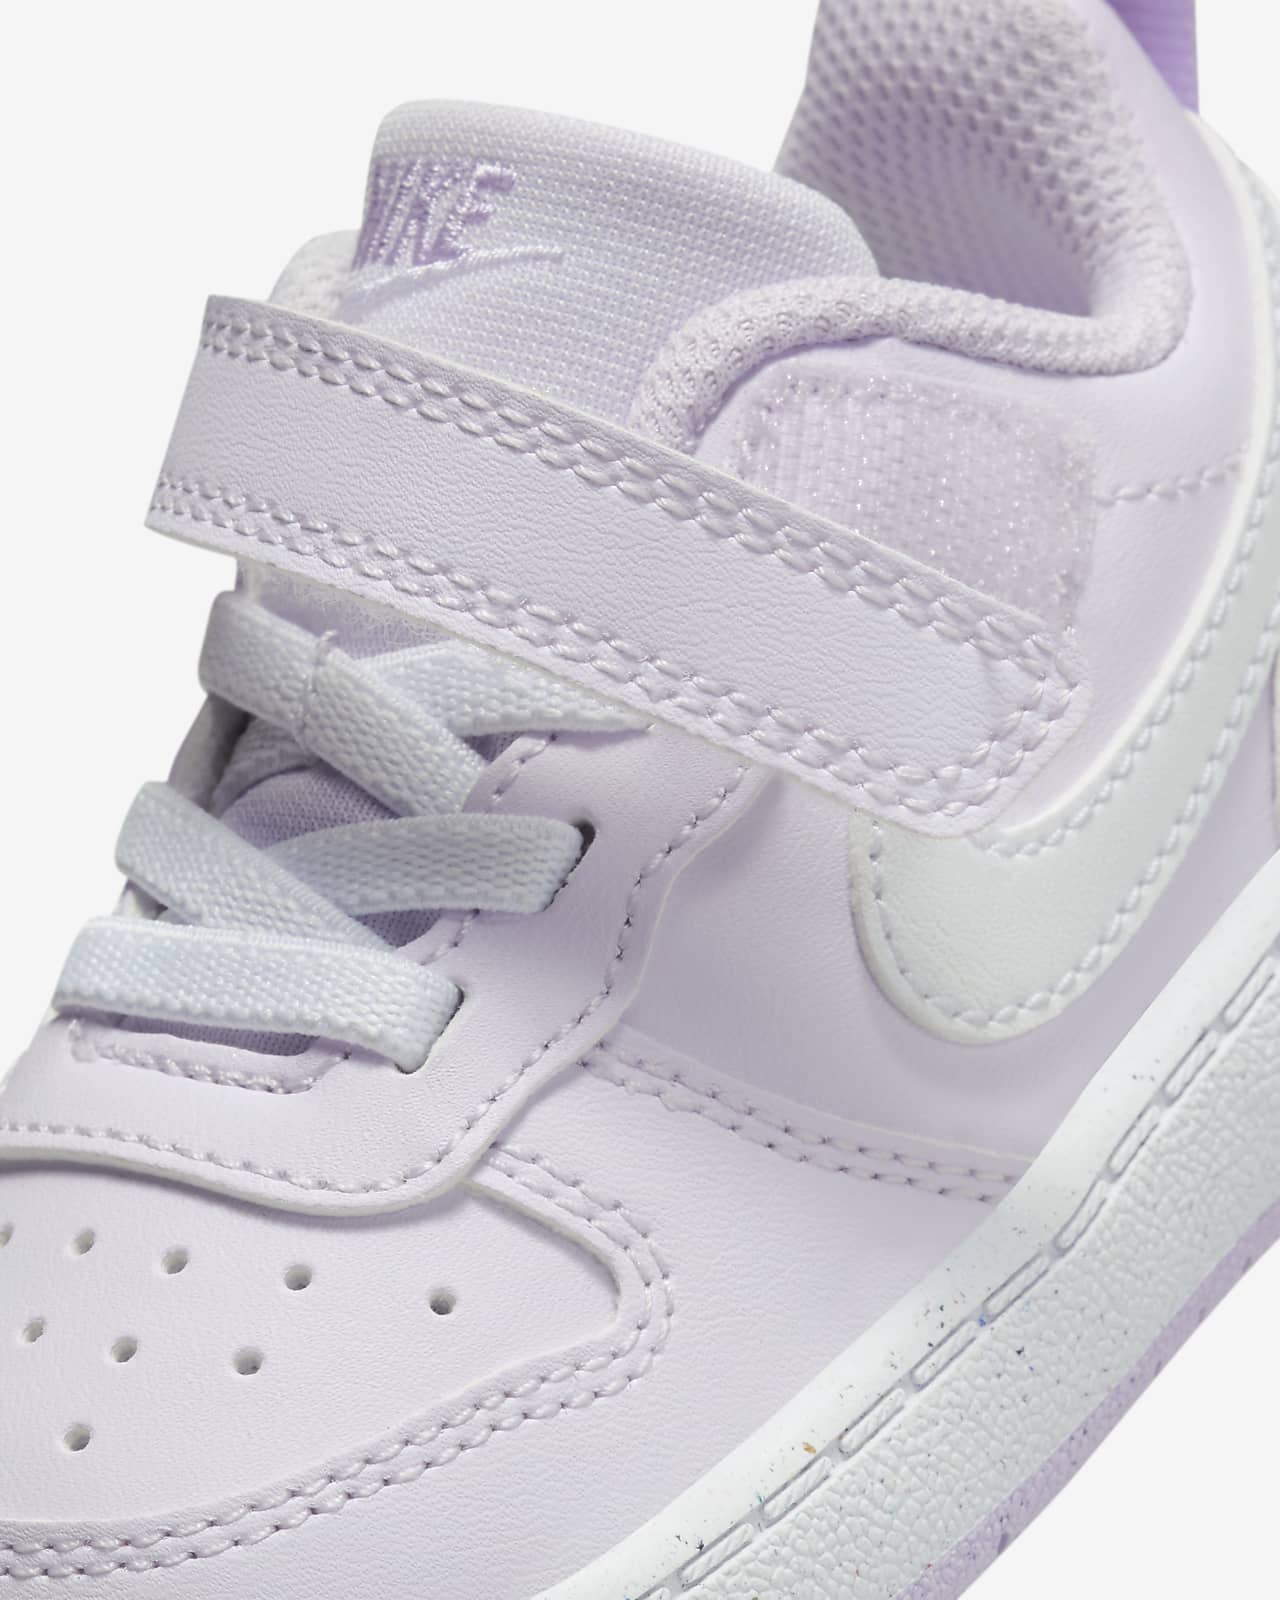 Nike Court Baby/Toddler Recraft Shoes. Borough Low